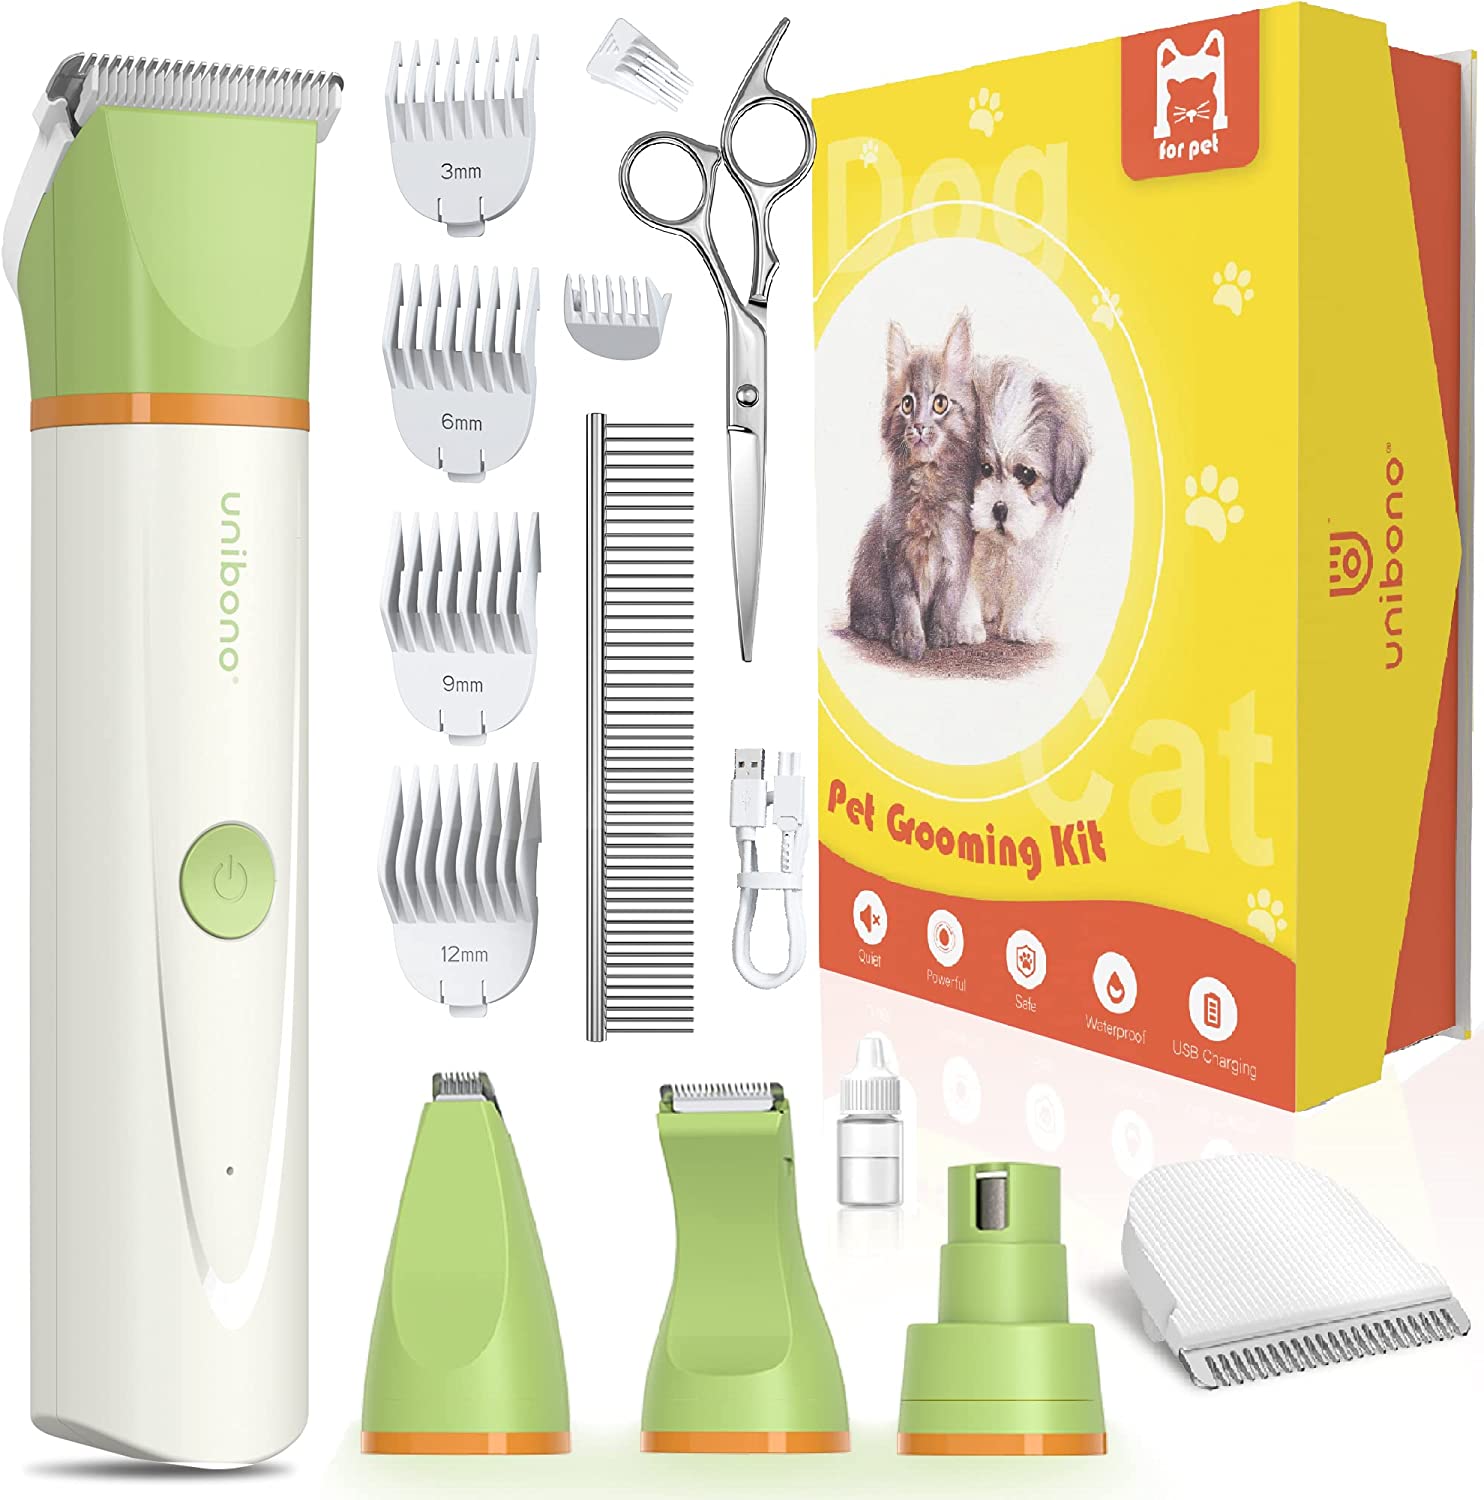 unibono Dog Grooming Clippers Kit